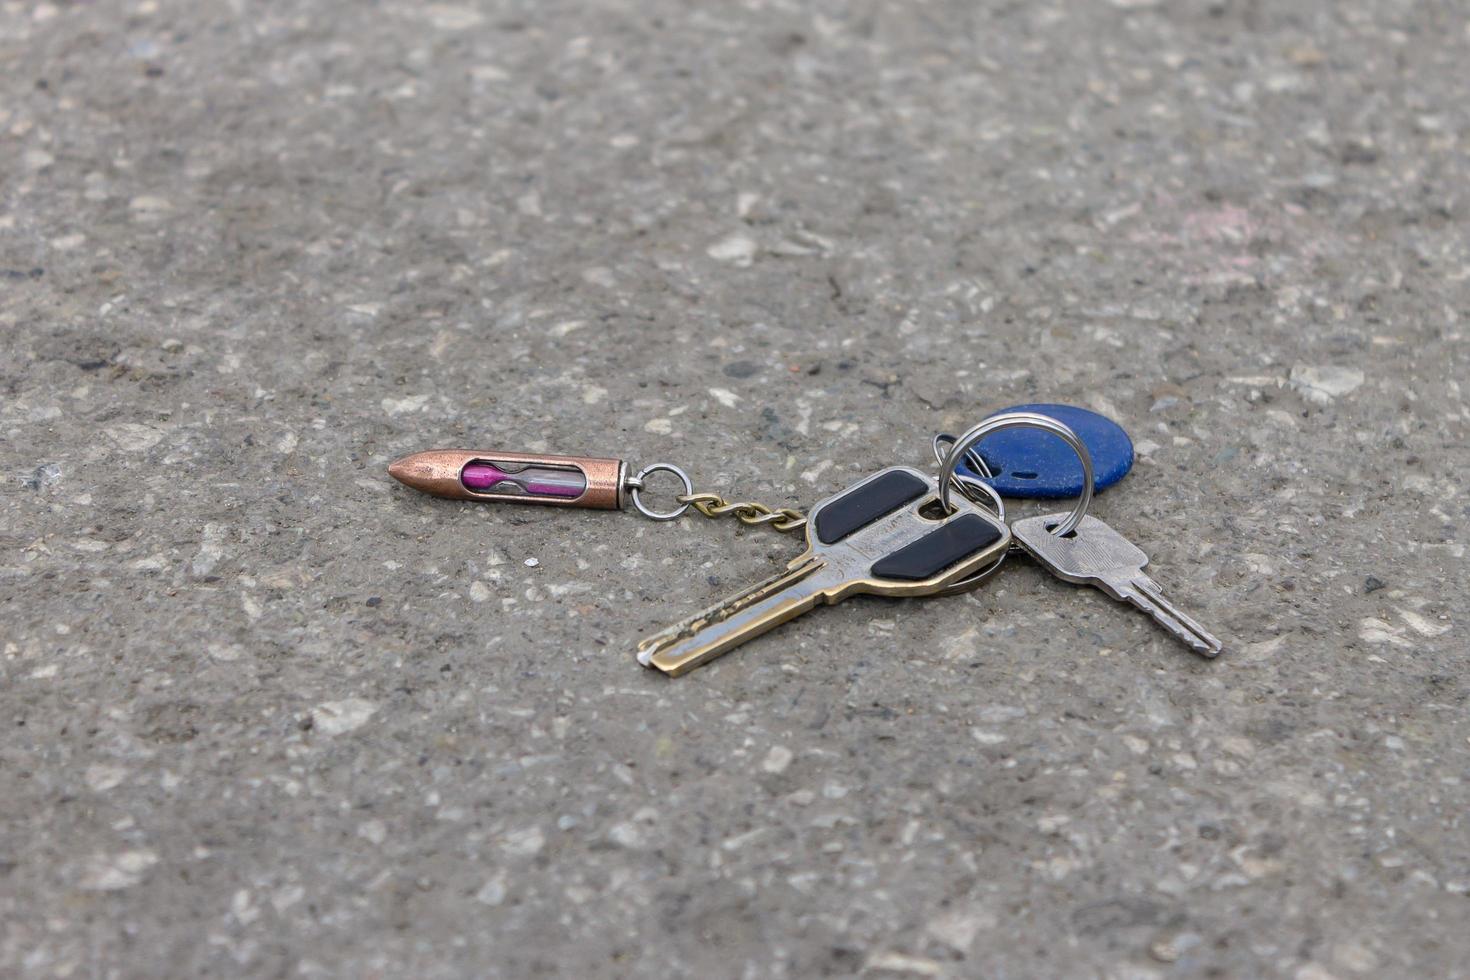 Lost bunch of old keys with a key fob on the road in a city park photo